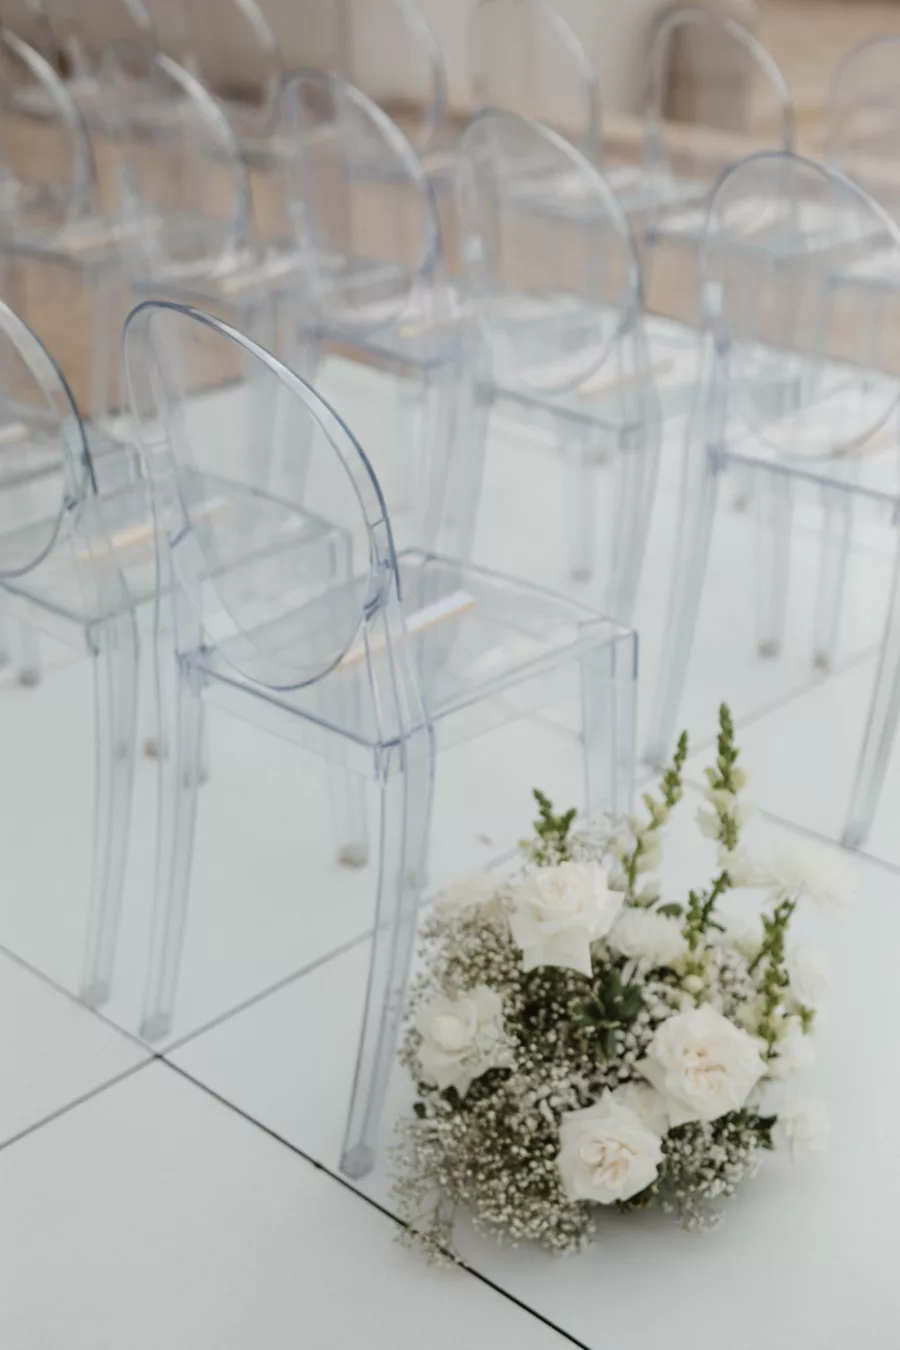 Acrylic Wedding Ceremony Ghost Chairs with White Roses, Baby's Breath, and Snap Dragon Aisle Floral Arrangement Decor Ideas | Tampa Bay Kate Ryan Event Rentals